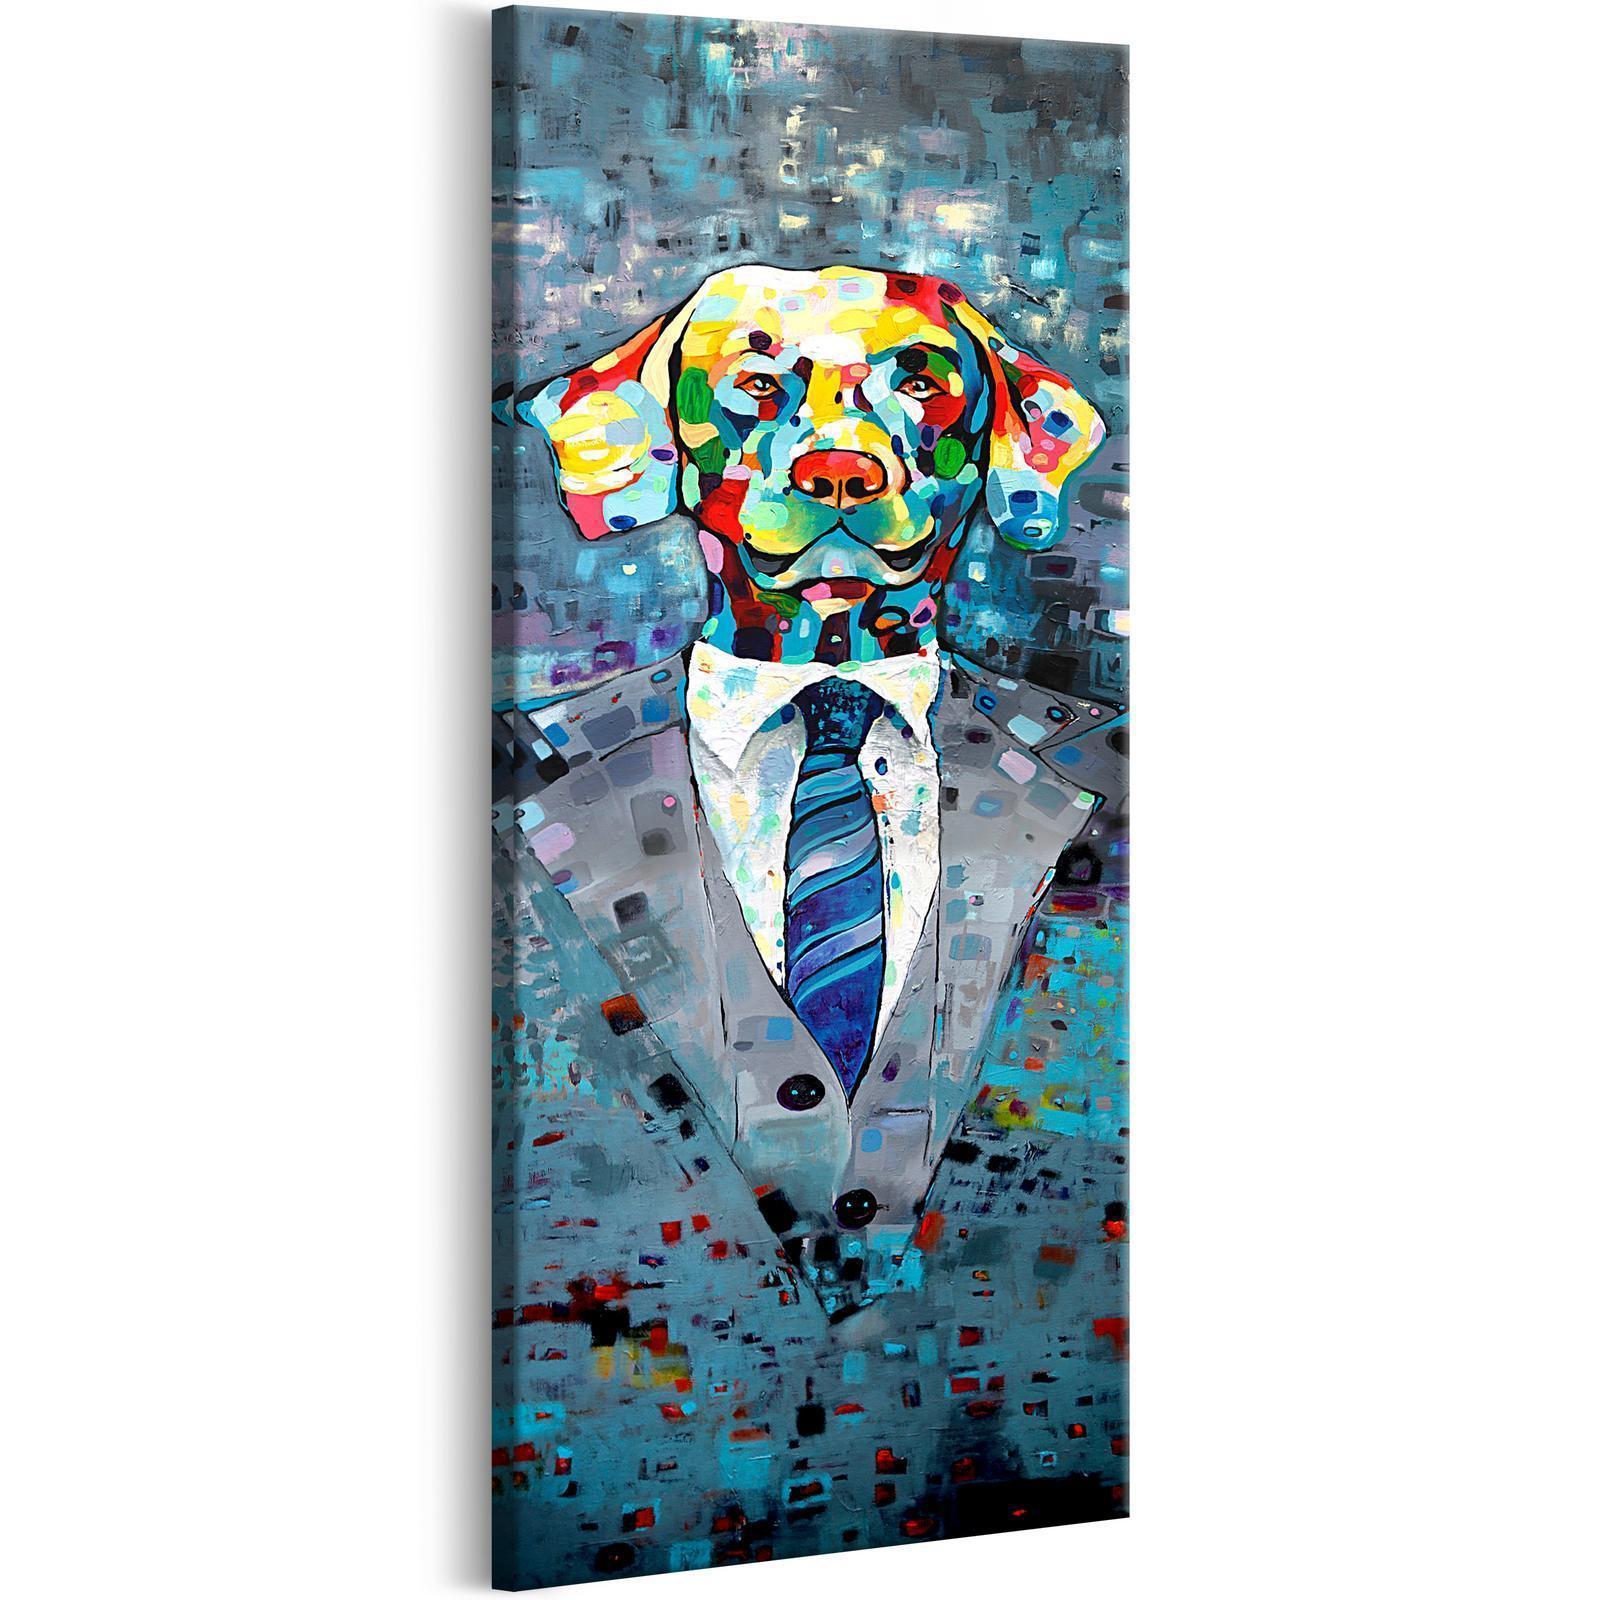 Tableau - Dog in a Suit